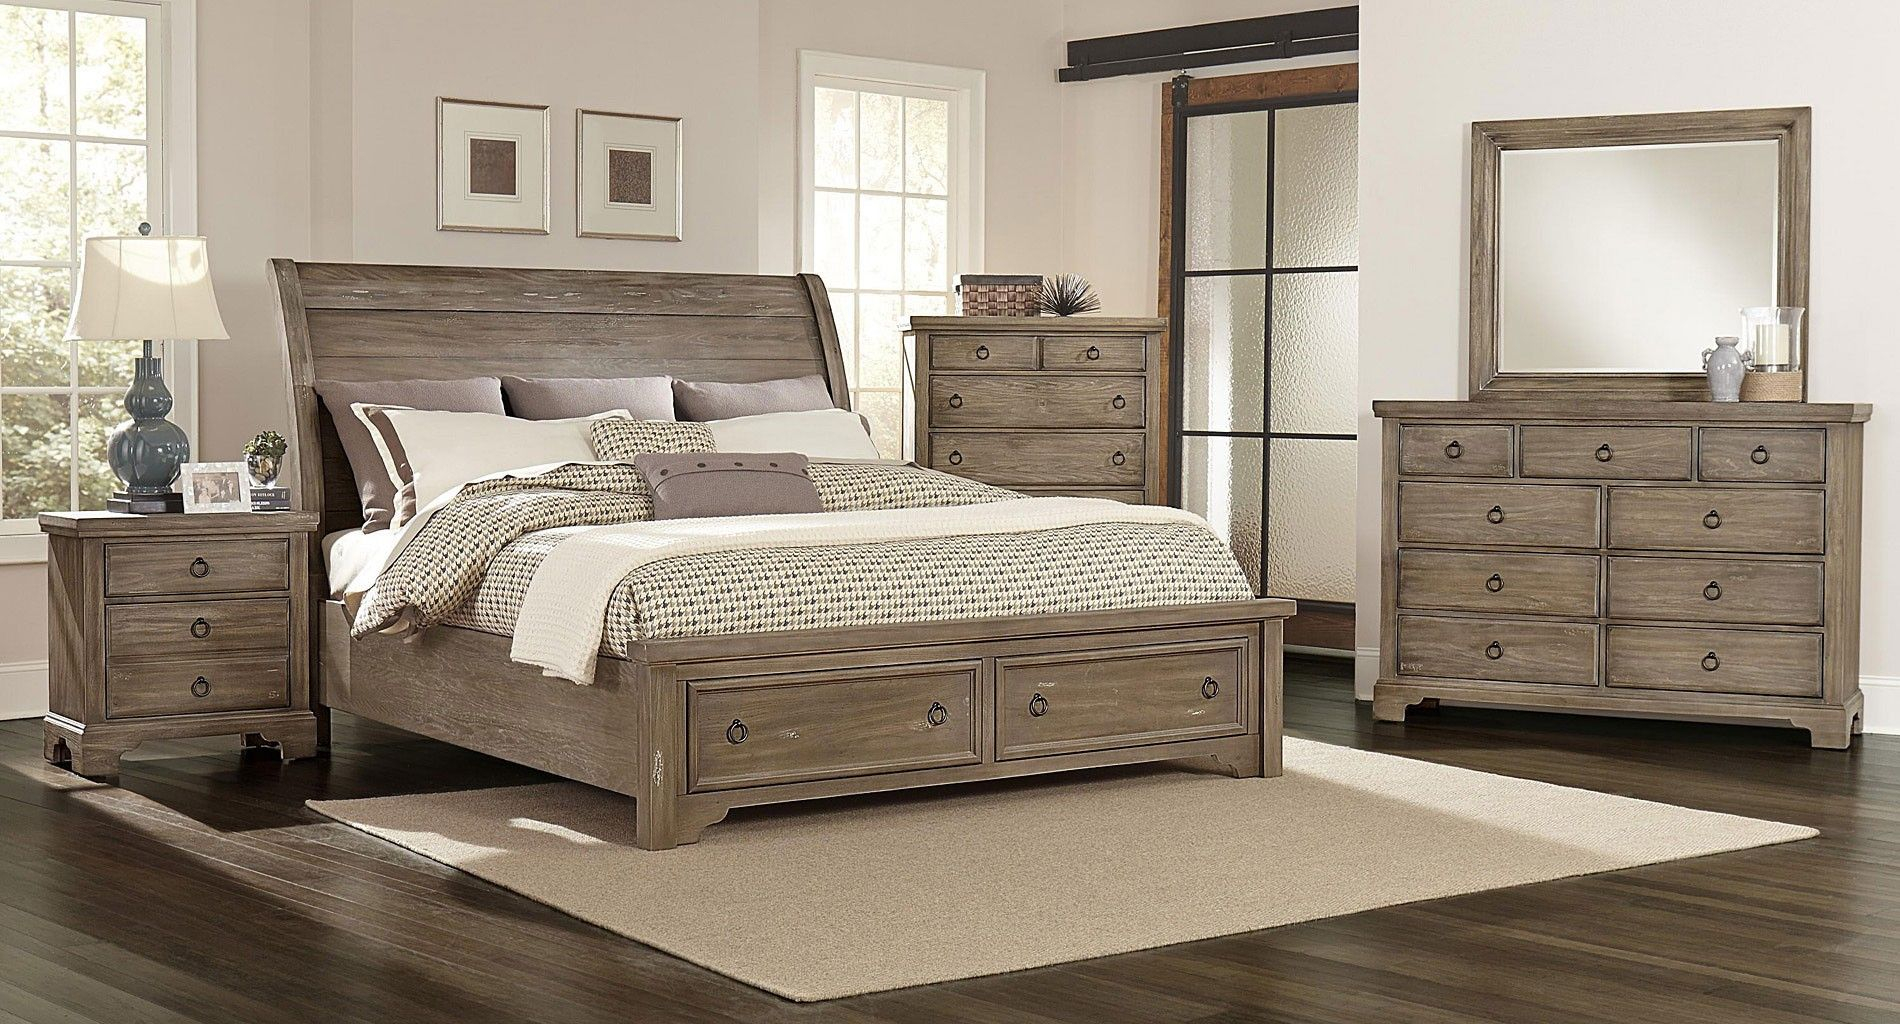 Whiskey Barrel Storage Bedroom Set Rustic Gray In 2019 Bedroom within size 1900 X 1024